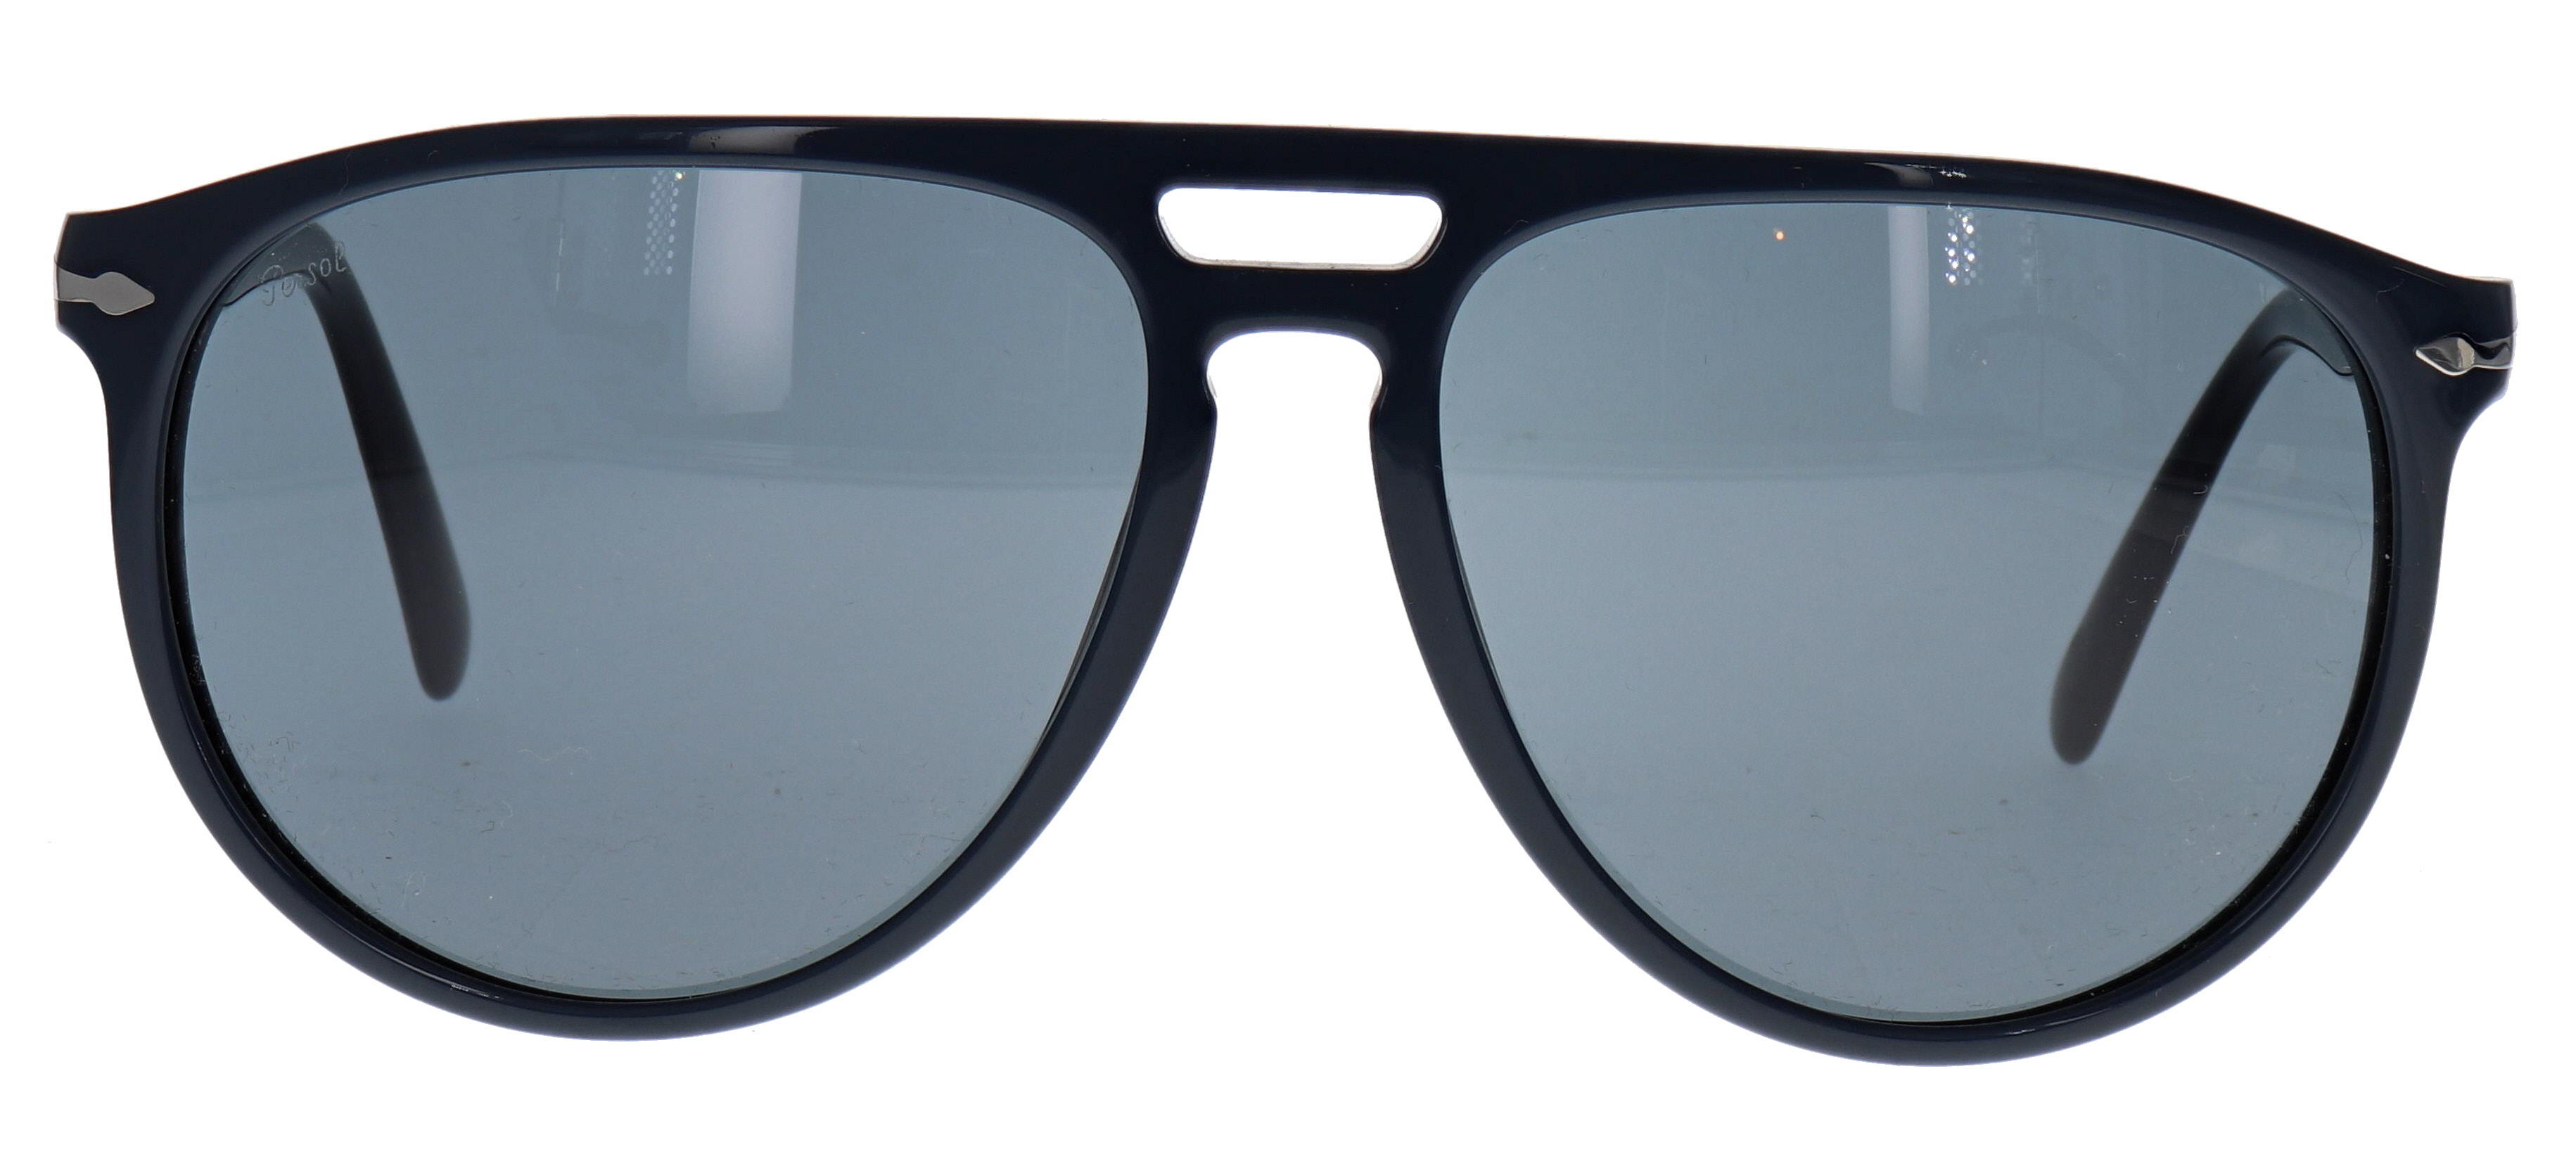 Persol 3311-S